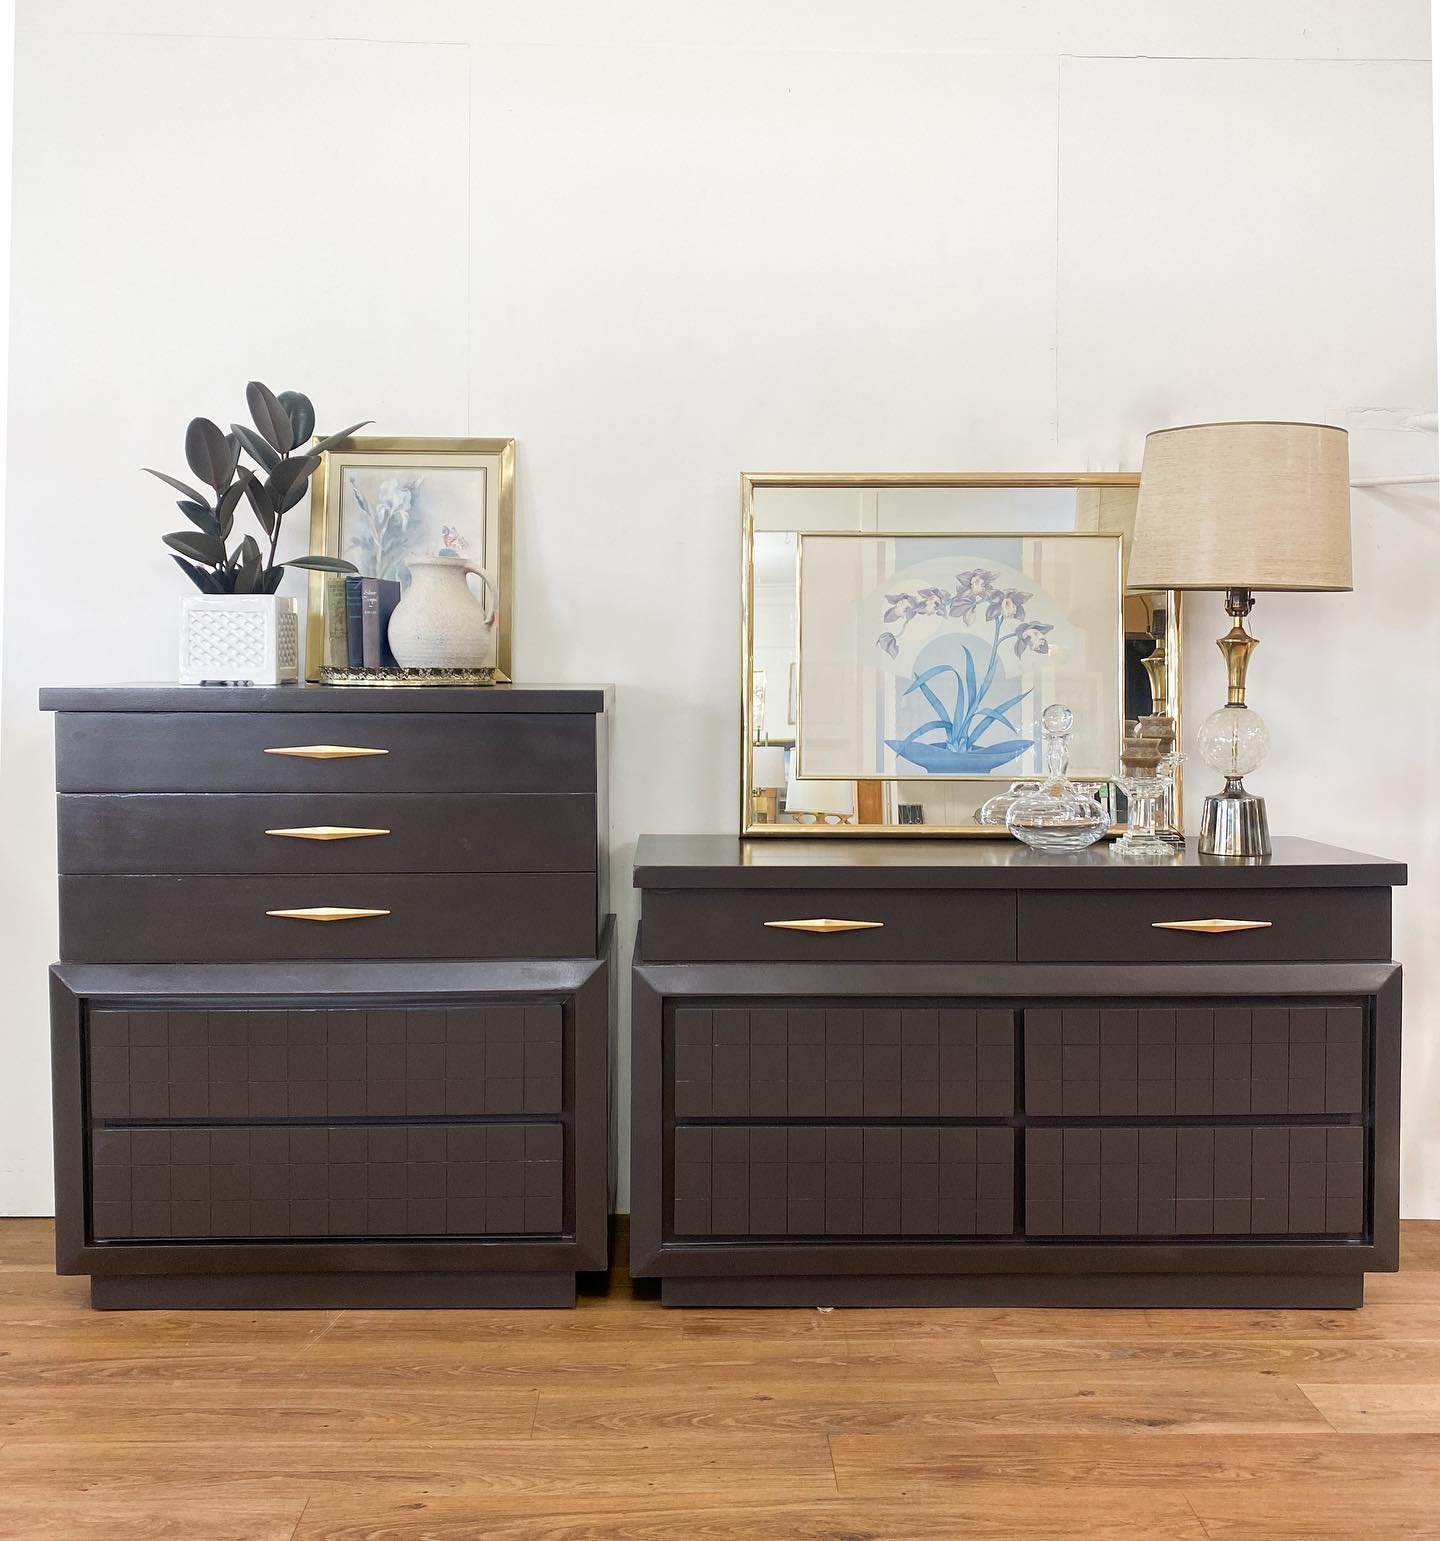 Another dresser set transformed and now available in the shop! We painted these MCM checkered beauties in a cocoa satin black, while keeping the original brass hardware for a fresh and modern look. What do you think of the new look? 

Low Cocoa dress